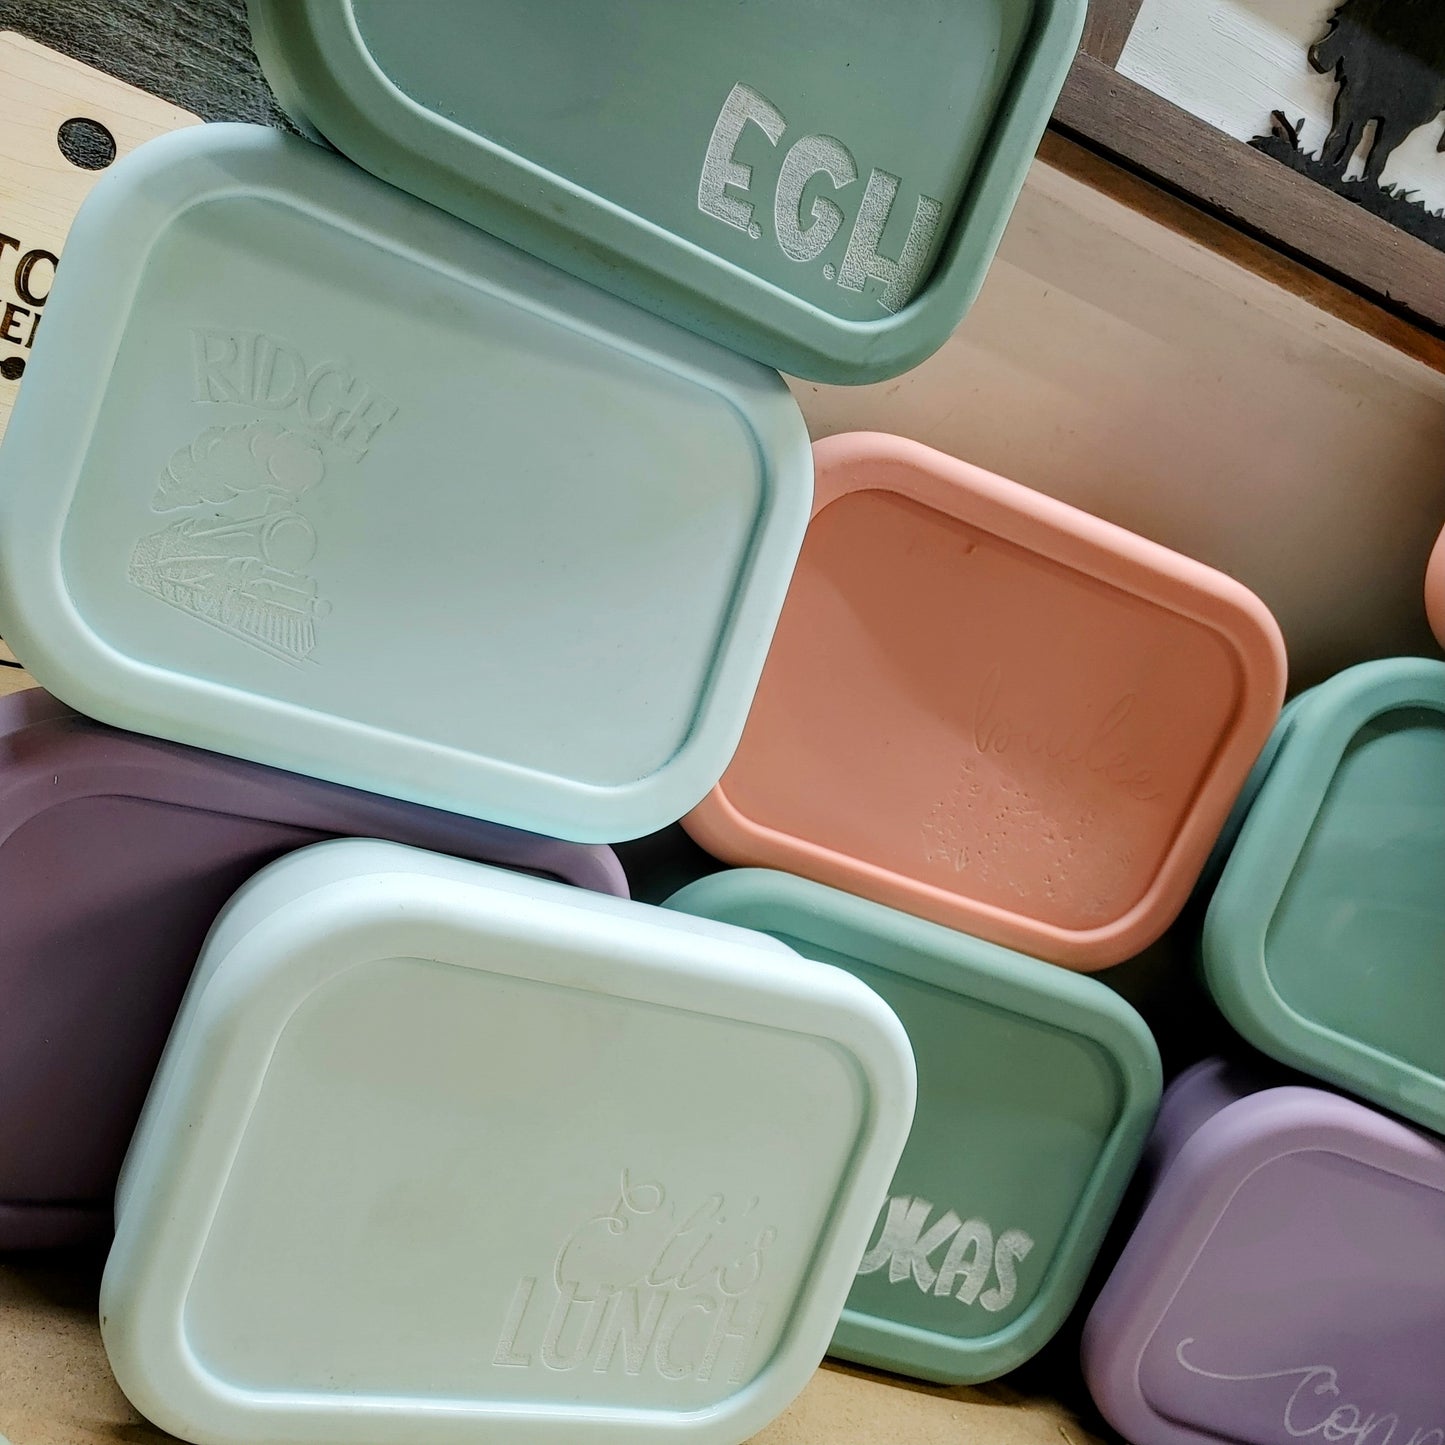 Personalized Silicone Bento Box Lunch Container for Kids Bento Box